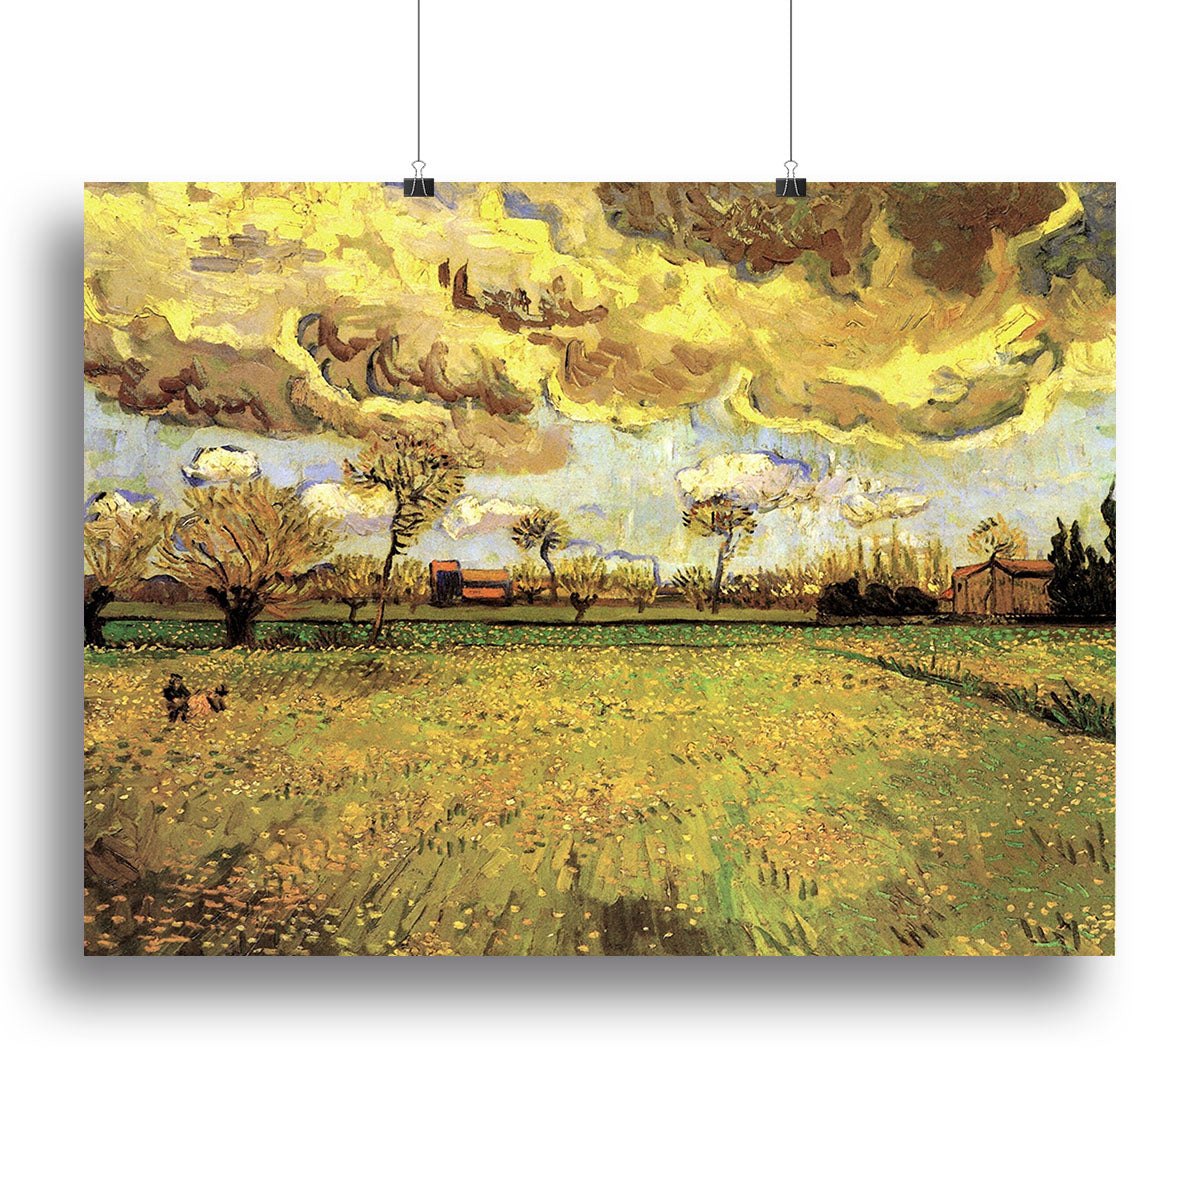 Landscape Under a Stormy Sky by Van Gogh Canvas Print or Poster - Canvas Art Rocks - 2